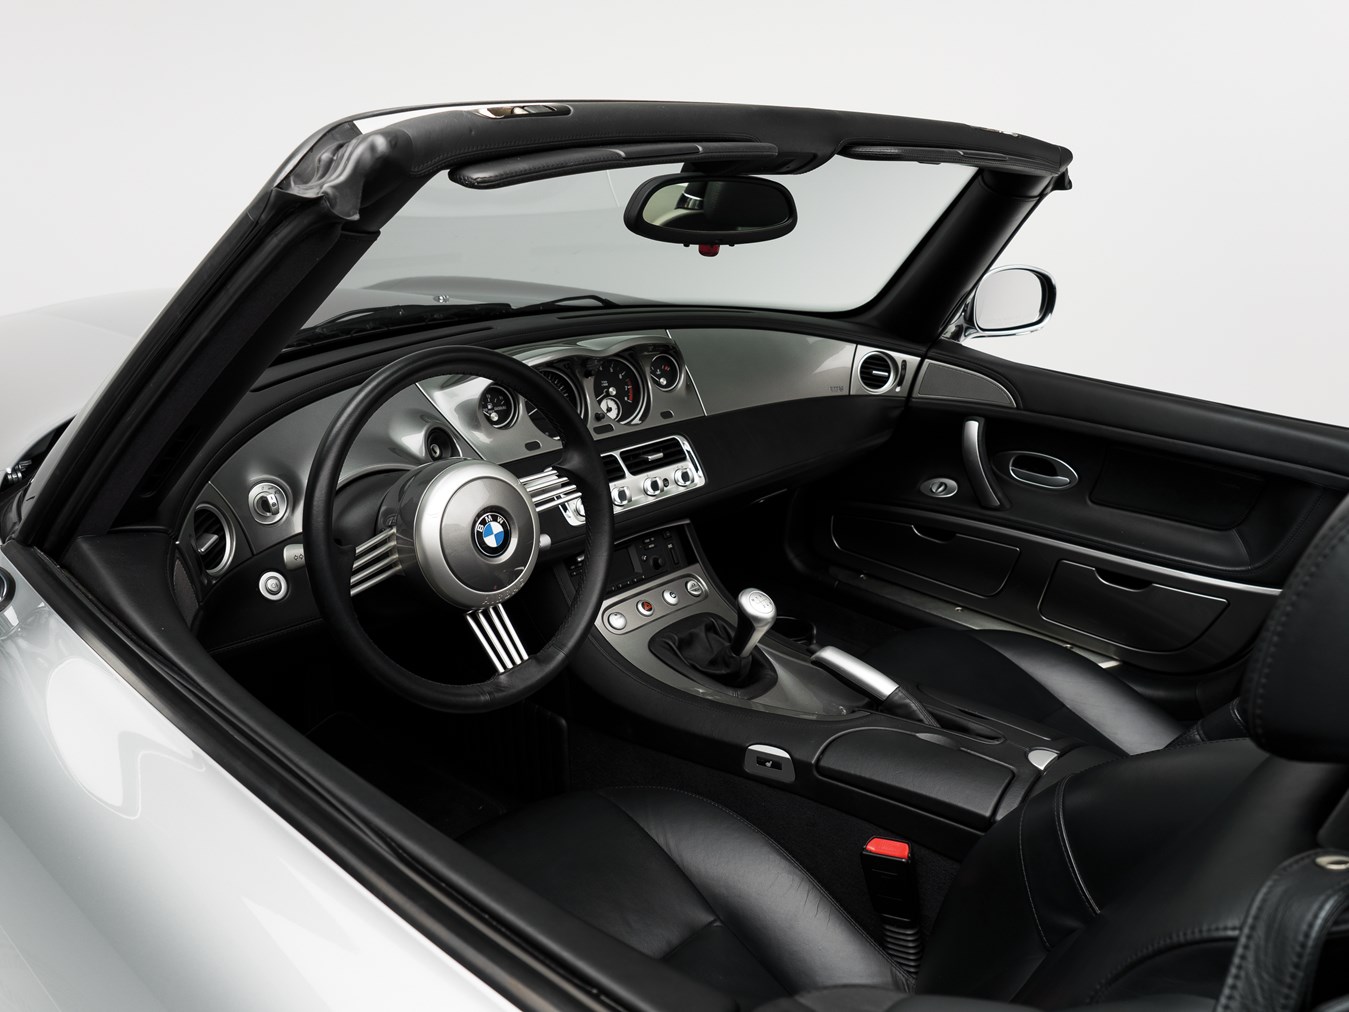 Now You Can Own Steve Jobs’ BMW Z8 And The Hated Motorola Flip Phone That Came With It